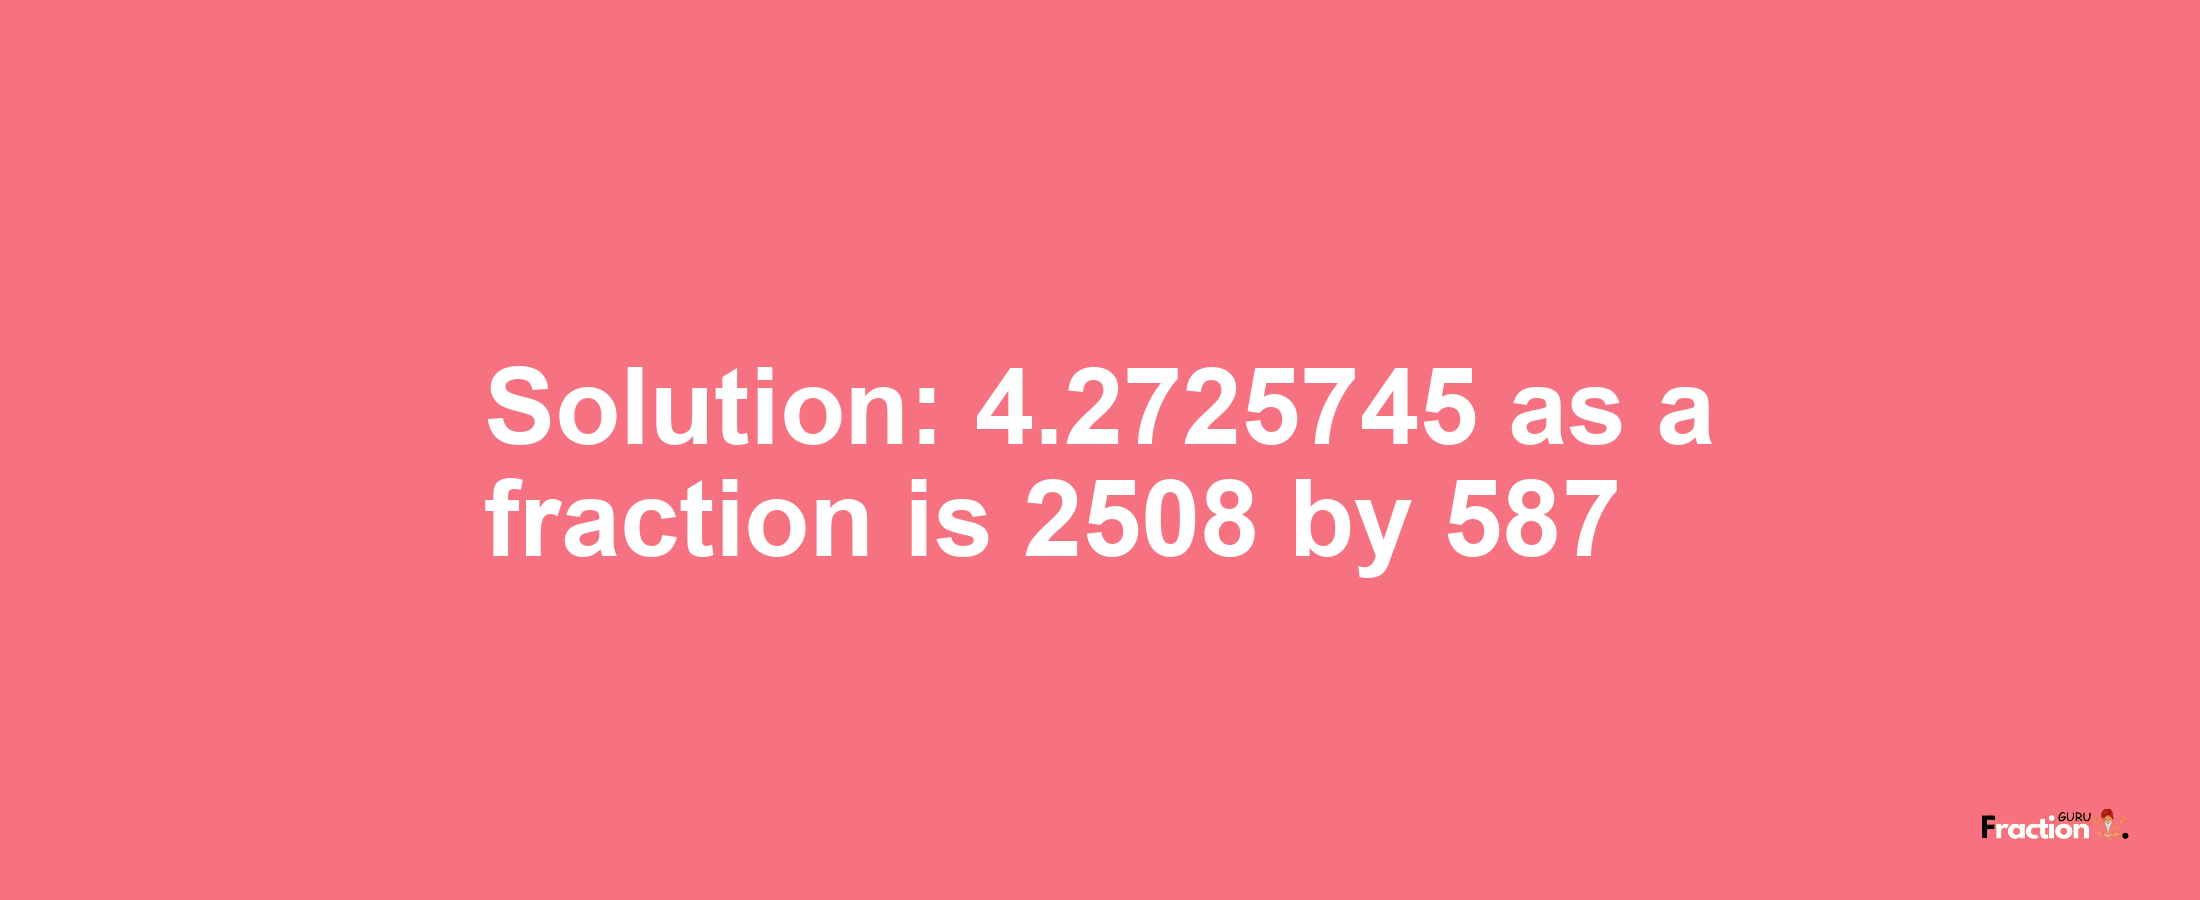 Solution:4.2725745 as a fraction is 2508/587